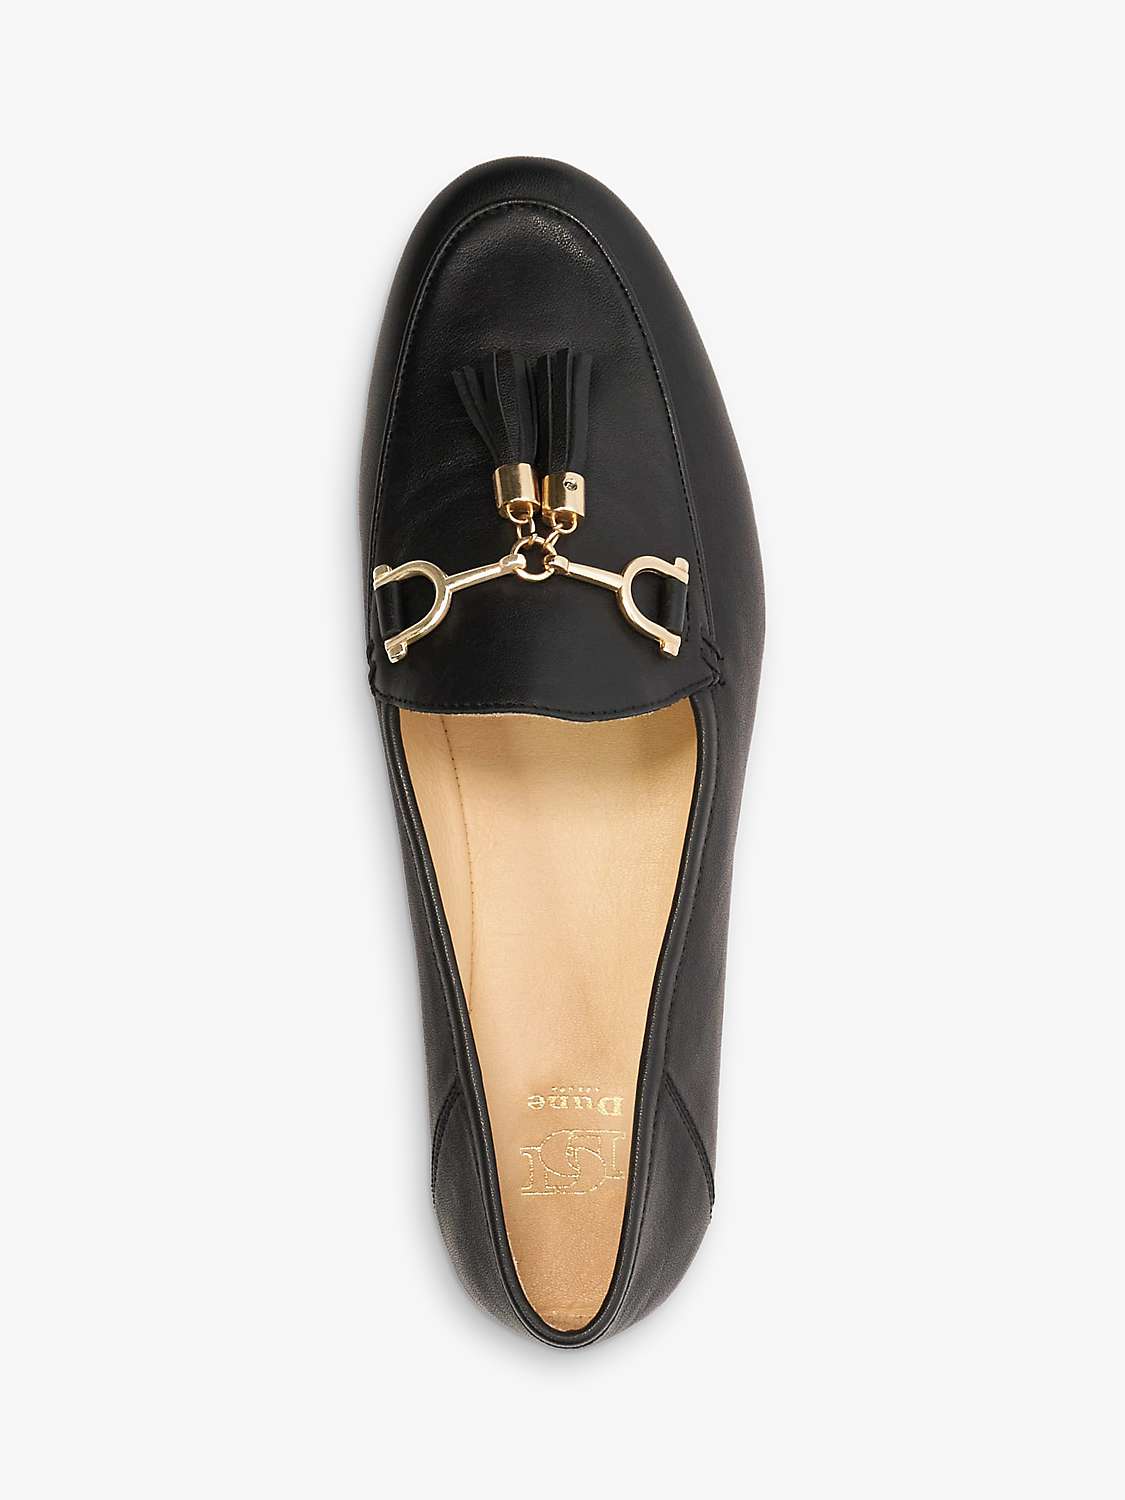 Buy Dune Graysons Leather Flexible Sole Tassel Loafers, Black Online at johnlewis.com